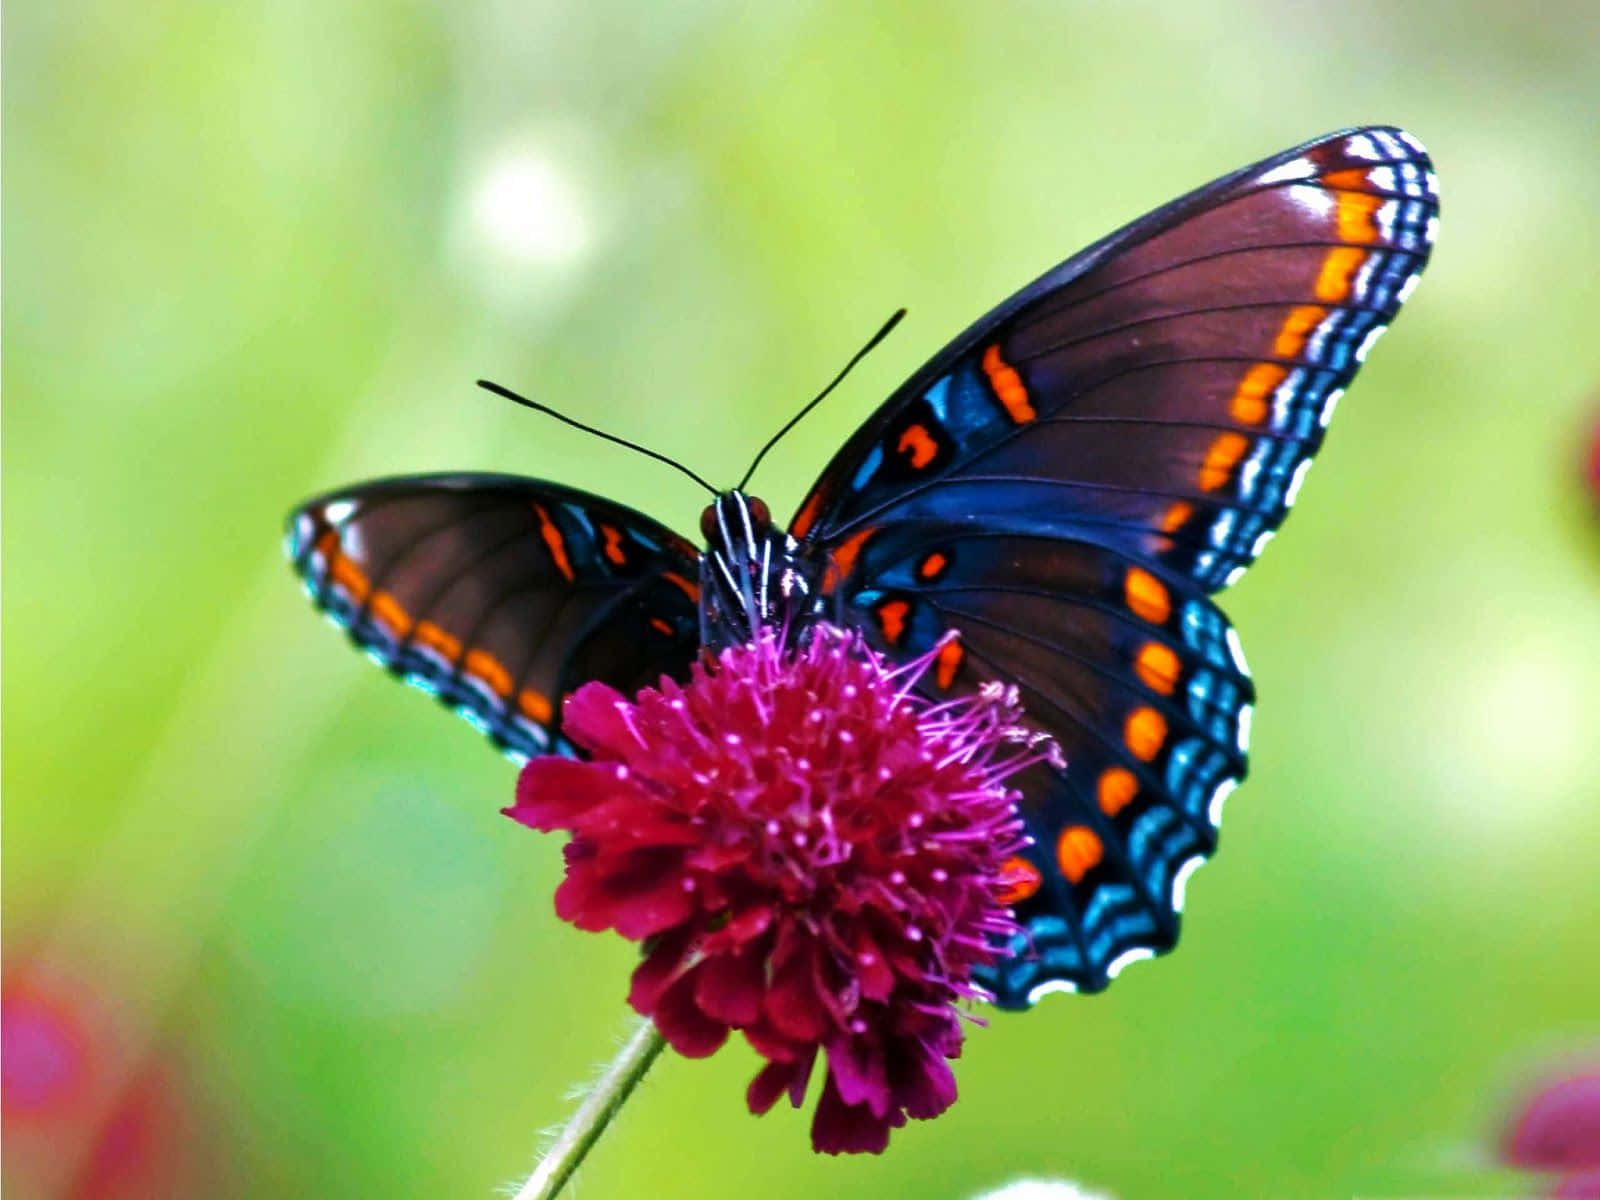 A butterfly sits on a purple flower, basking in the sun